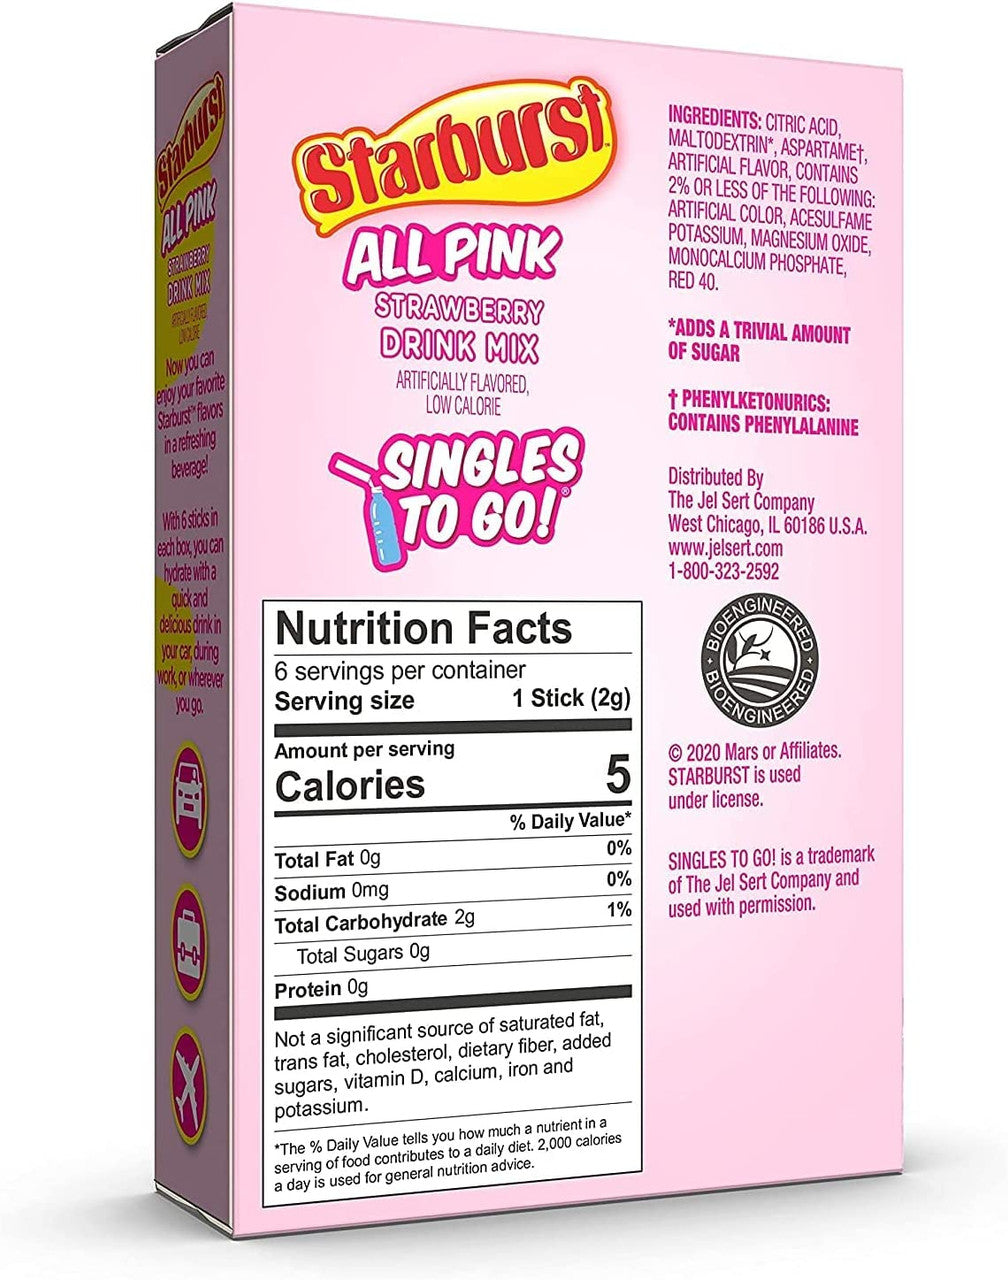 Starburst Zero Sugar All Pink Strawberry Drink Mix, 6 packets, 12.2g/0.4 oz. Box {Imported from Canada}